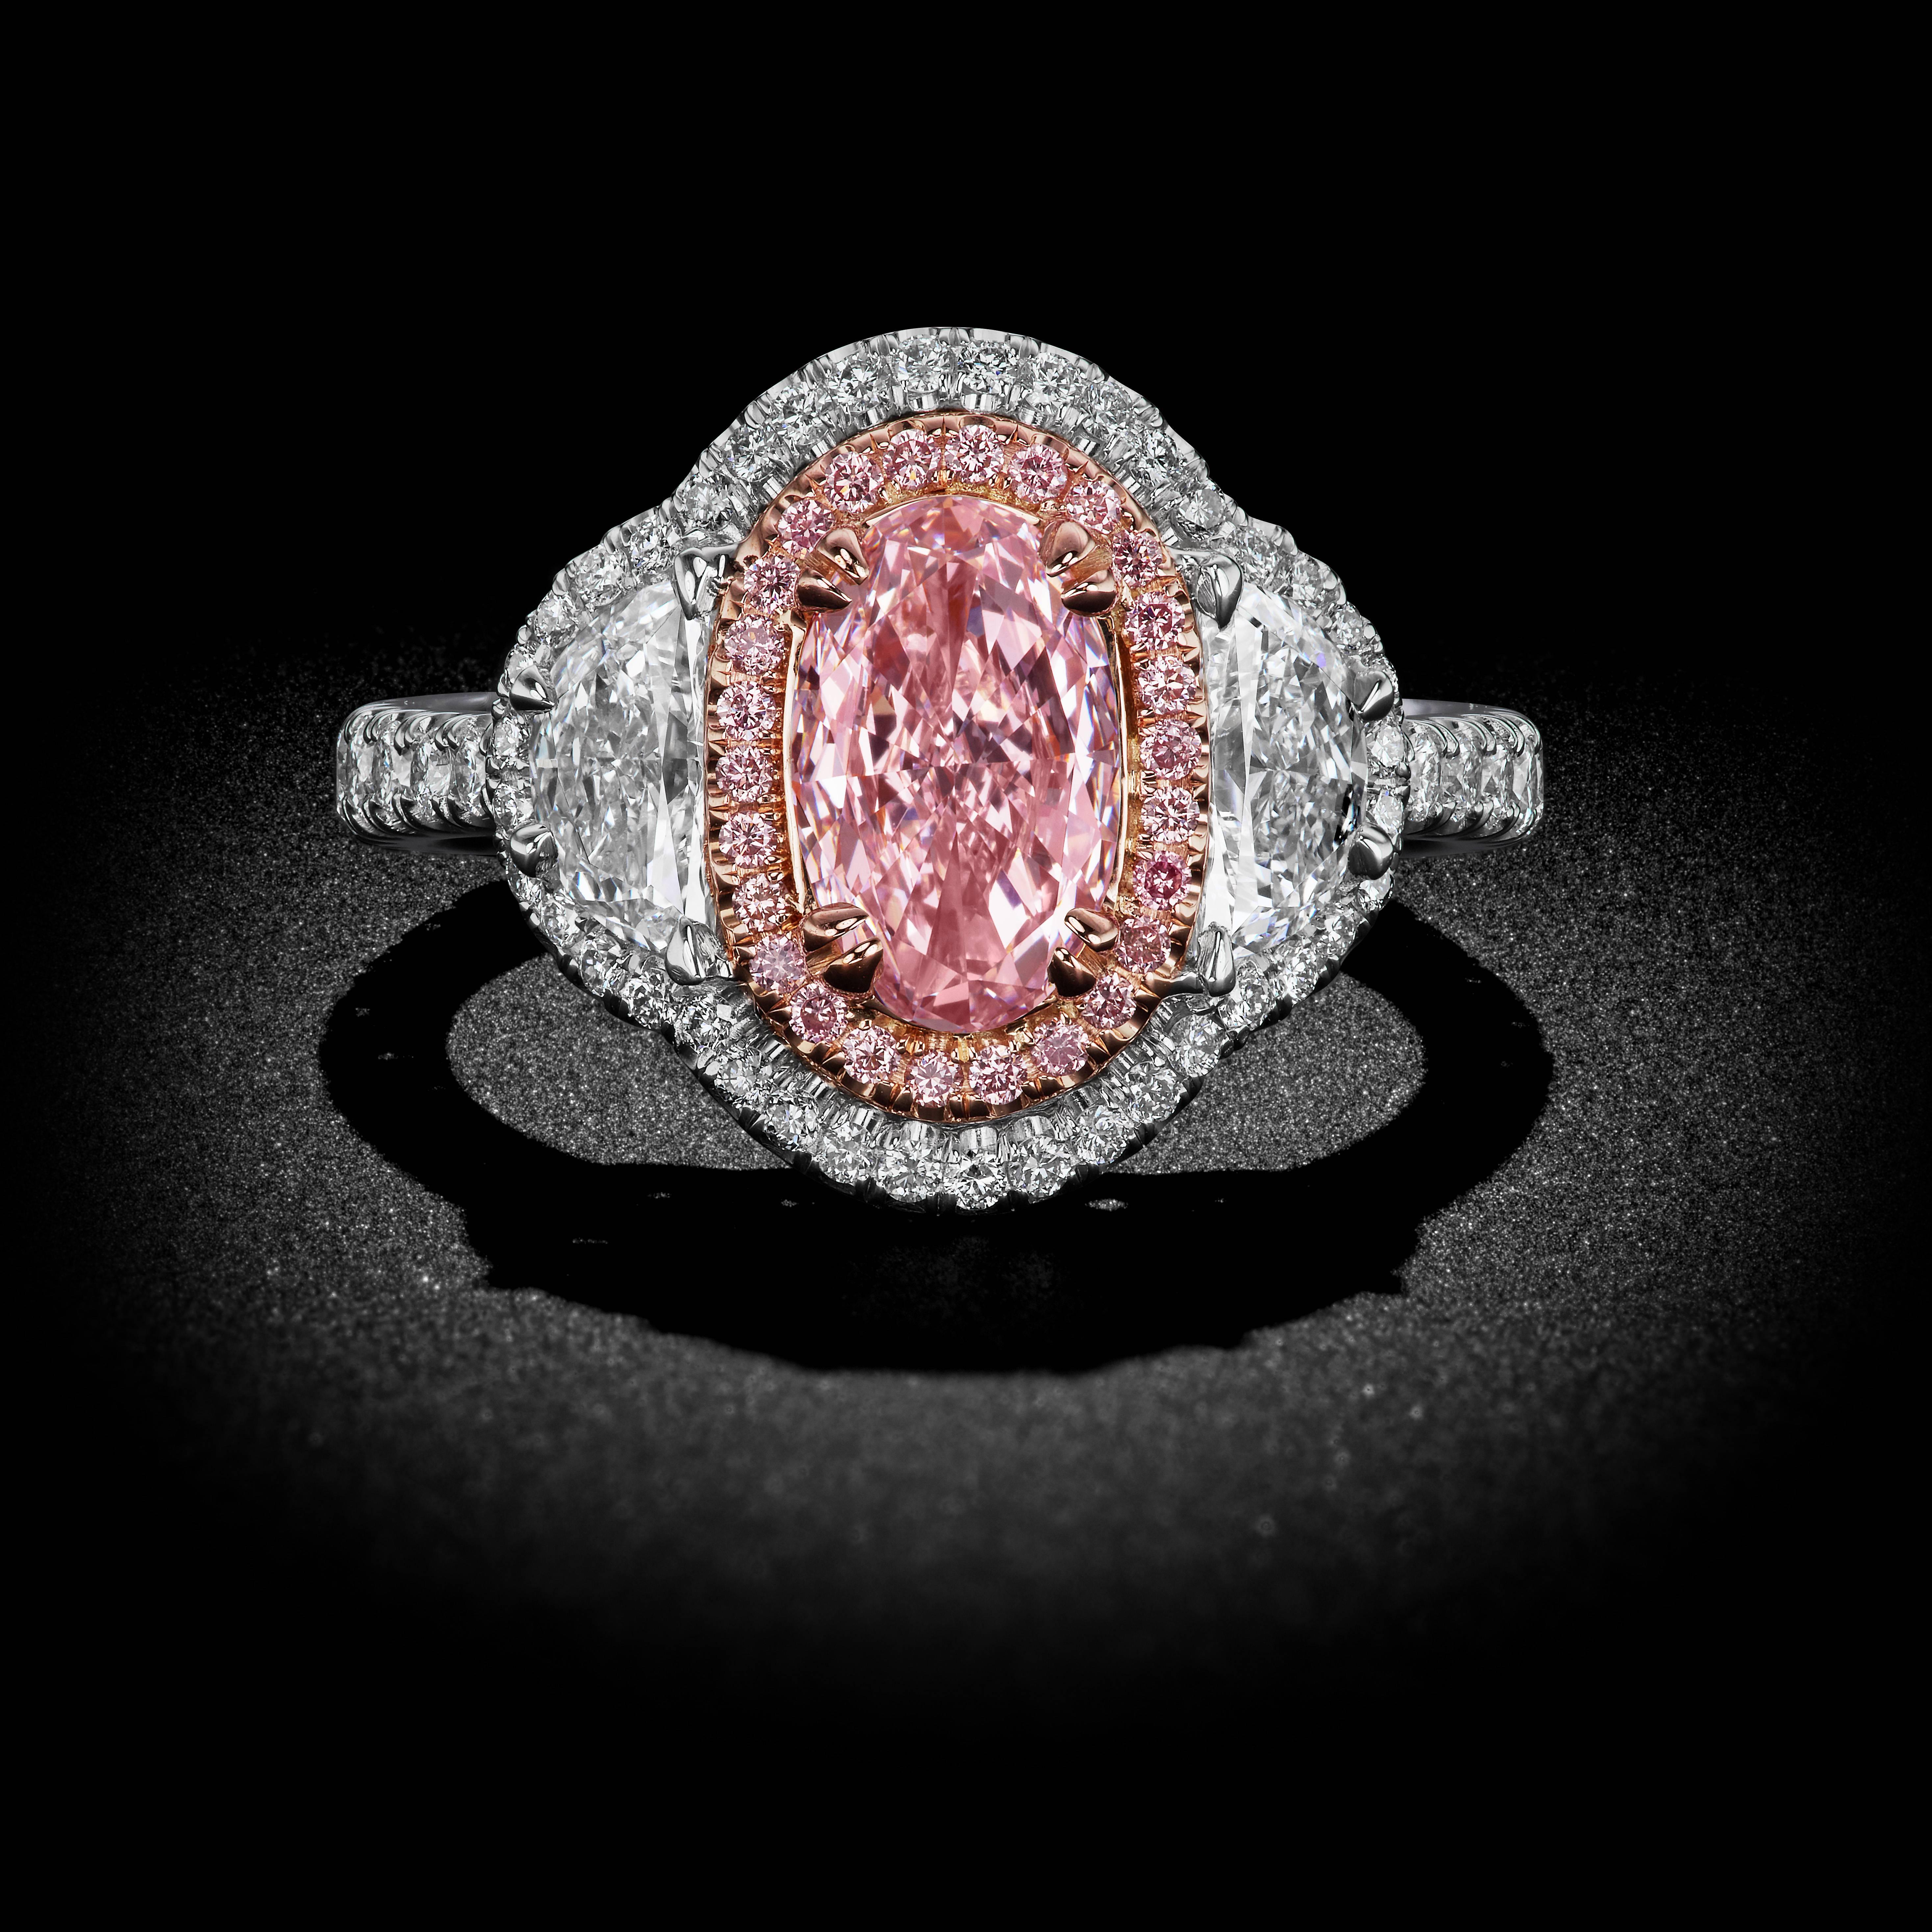 A delicate setting of bright Platinum and 18k rose gold gleams alight with brilliant white Diamond Pavé accents. A rare GIA certified Pink 1.00 ct Oval cut Diamond rests at the center accompanied by two half-moon white Diamond side-stones totaling